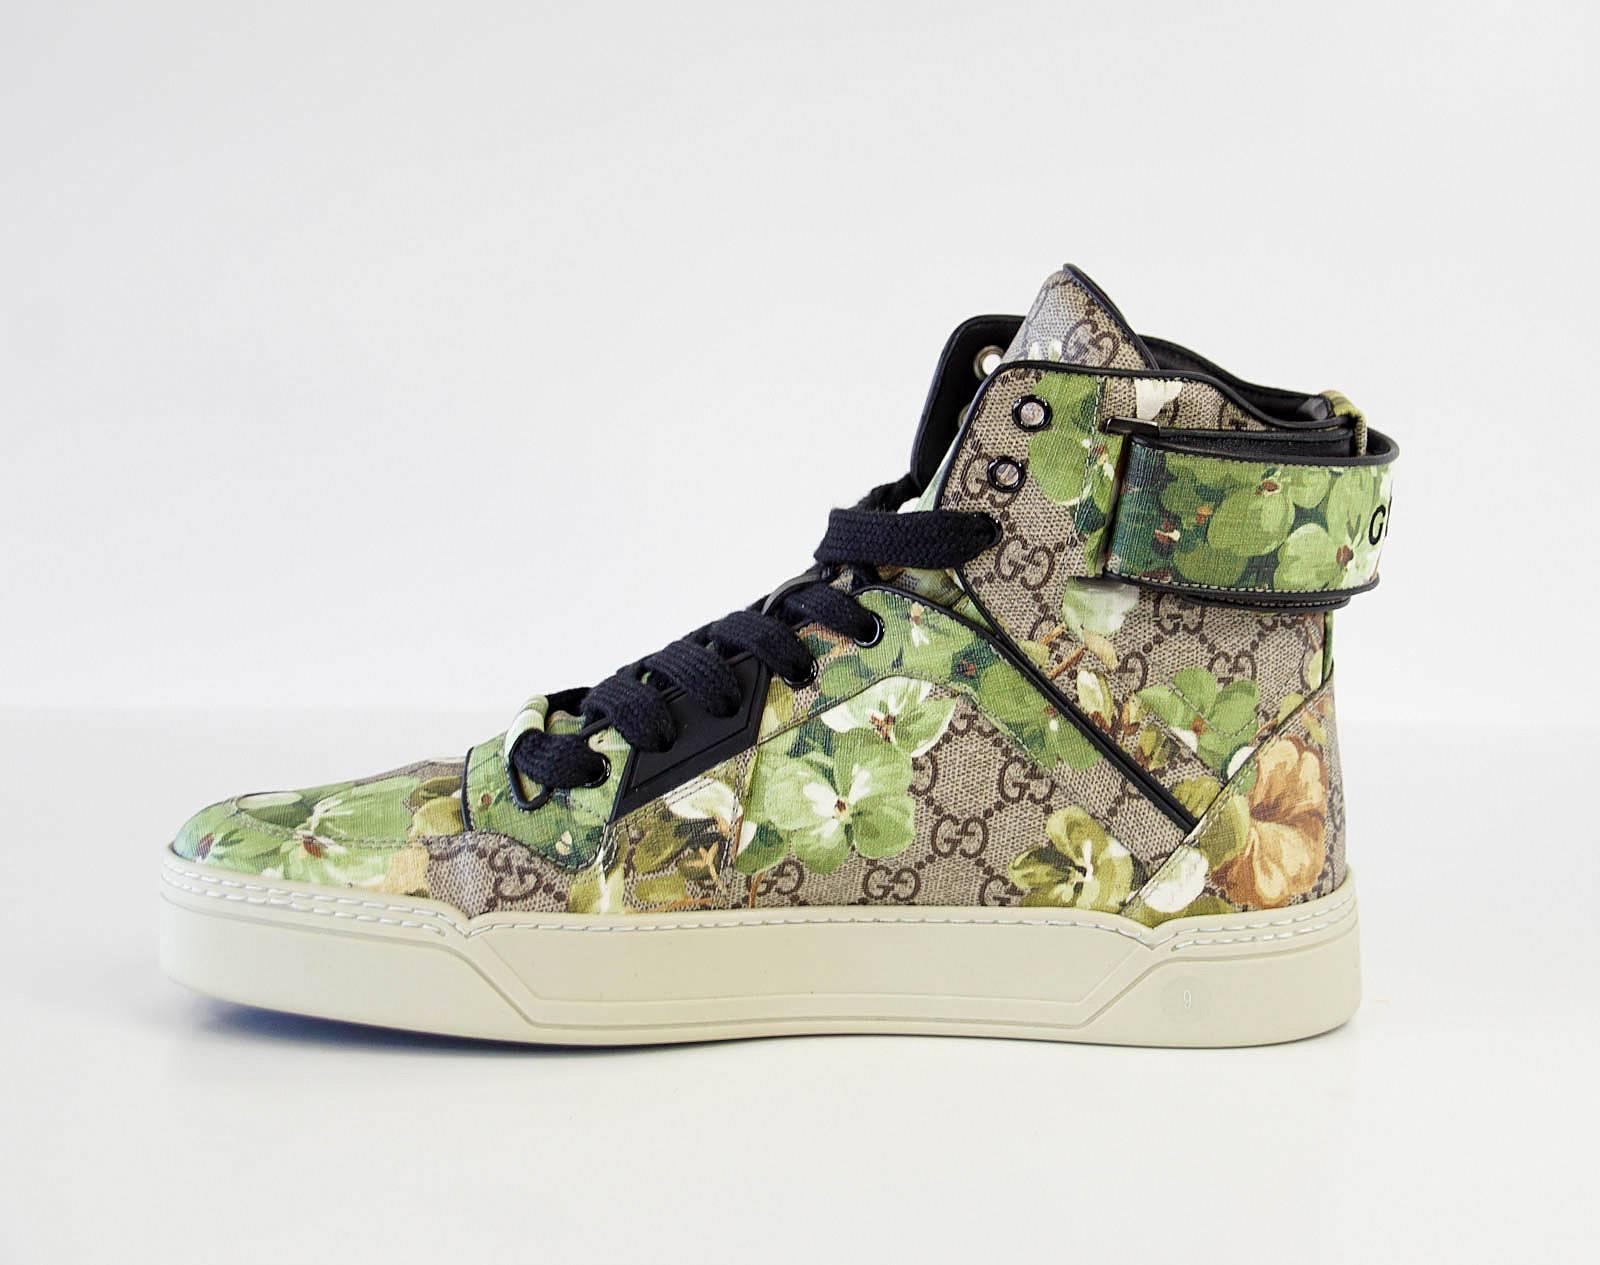 Guaranteed authentic GUCCI men's high top monogram Blooms sneaker.
GG logo canvas with green blooms. Divine!
GUCCI logo on rear edge.
Comes with signature box and sleeper.
NEW or NEVER WORN. 
final sale

USA SIZE 9

CONDITION:
NEW or NEVER WORN